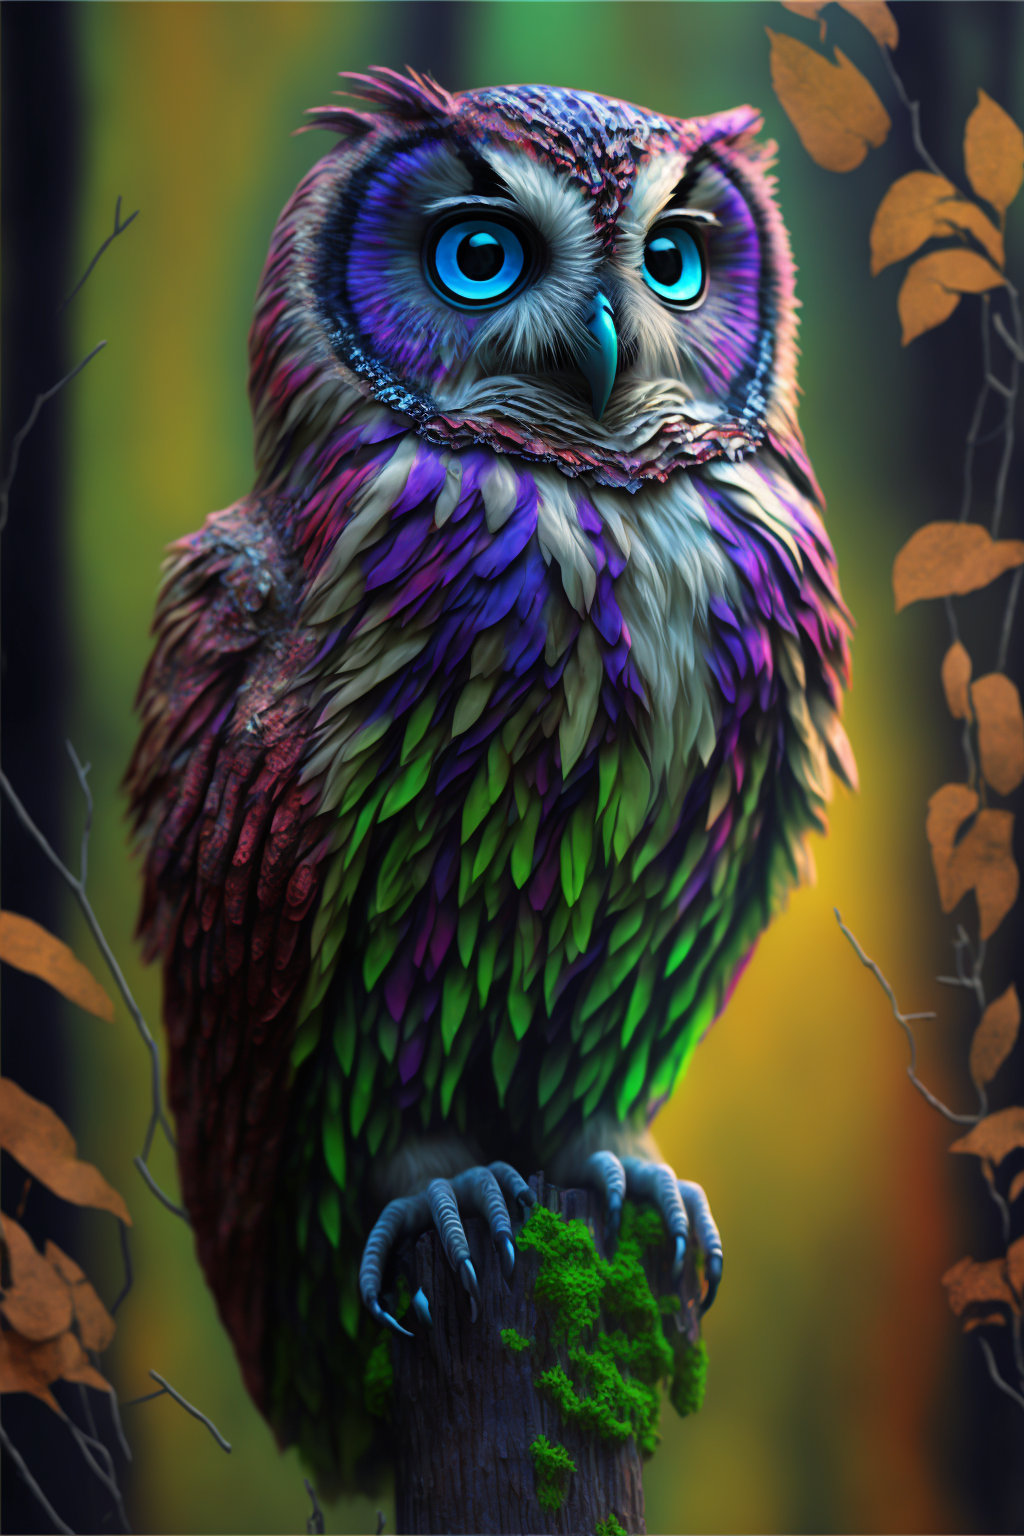 Owl in the style of Hyperrealistic Surrealistic Hypercolor 2